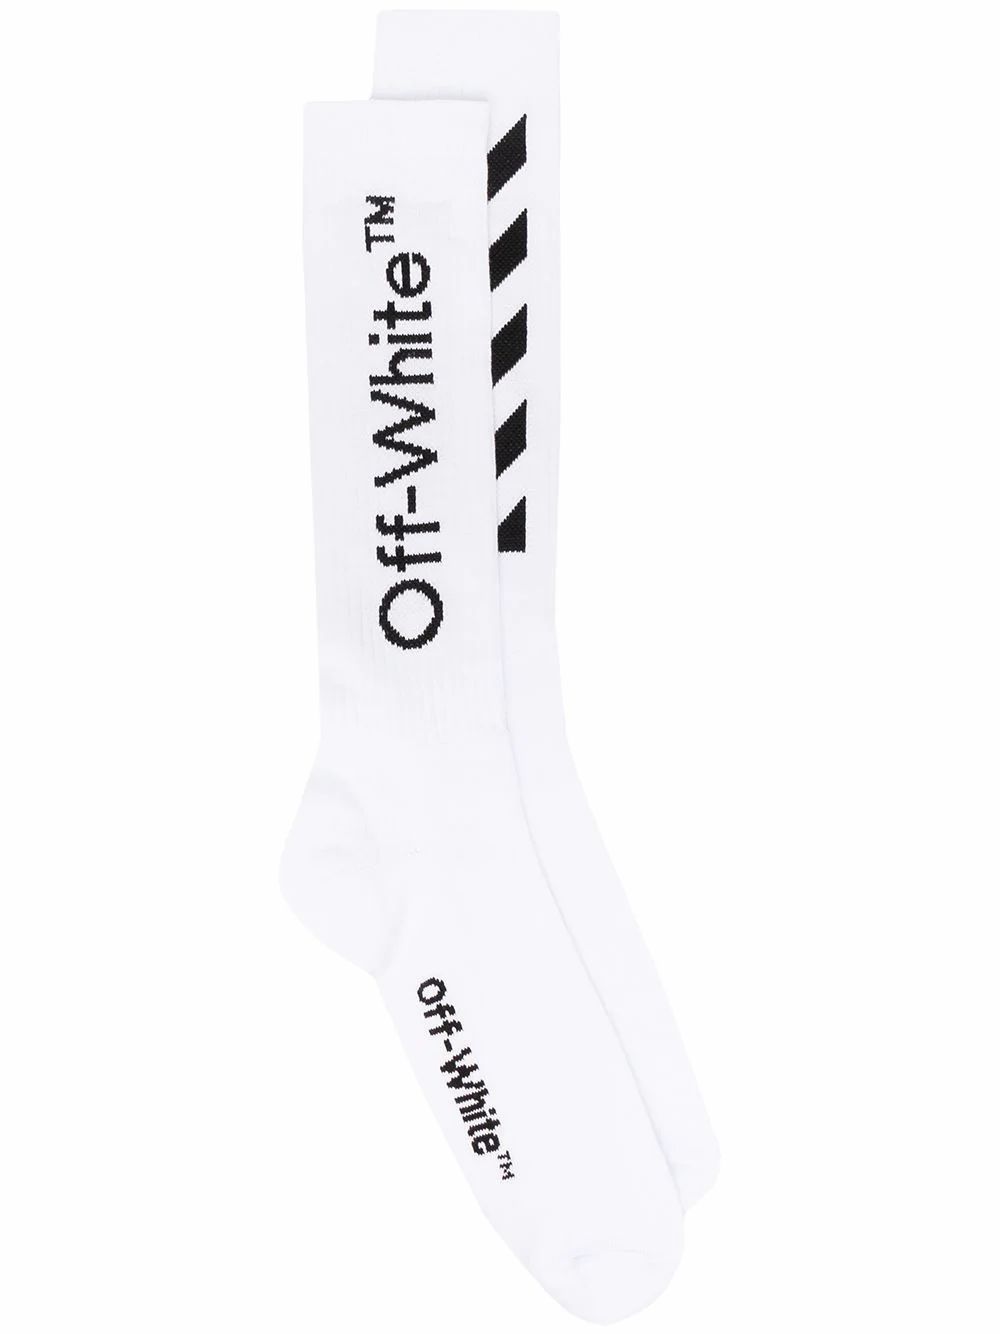 SOCKS OFF-WHITE, COTTON 100%, color WHITE, SS21, product code OMRA001R21KNI0030110